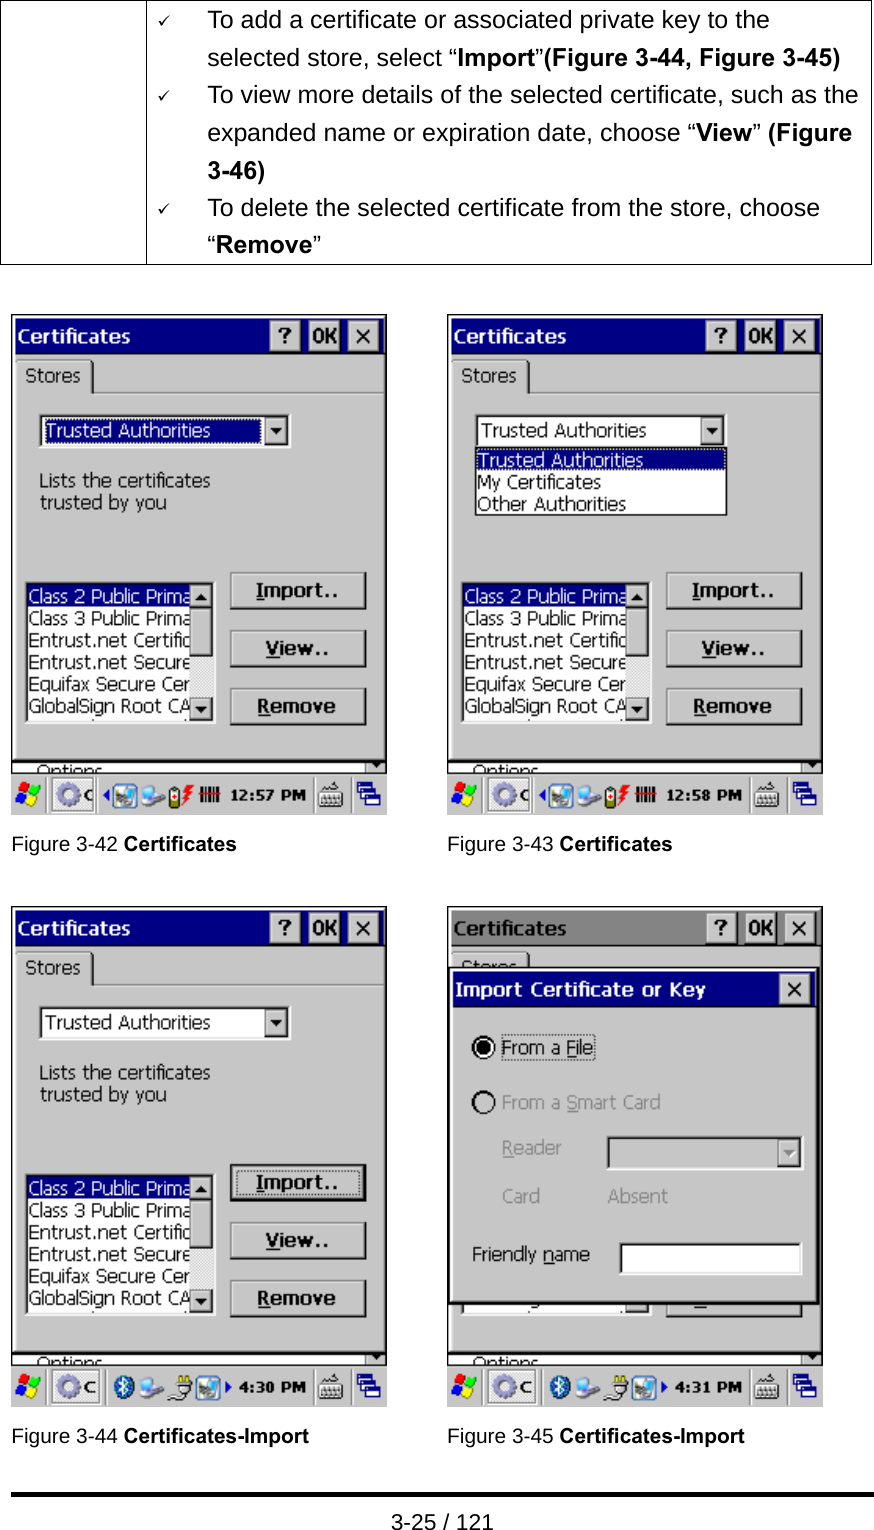  3-25 / 121 9 To add a certificate or associated private key to the selected store, select “Import”(Figure 3-44, Figure 3-45) 9 To view more details of the selected certificate, such as the expanded name or expiration date, choose “View” (Figure 3-46) 9 To delete the selected certificate from the store, choose “Remove”     Figure 3-42 Certificates  Figure 3-43 Certificates     Figure 3-44 Certificates-Import  Figure 3-45 Certificates-Import 